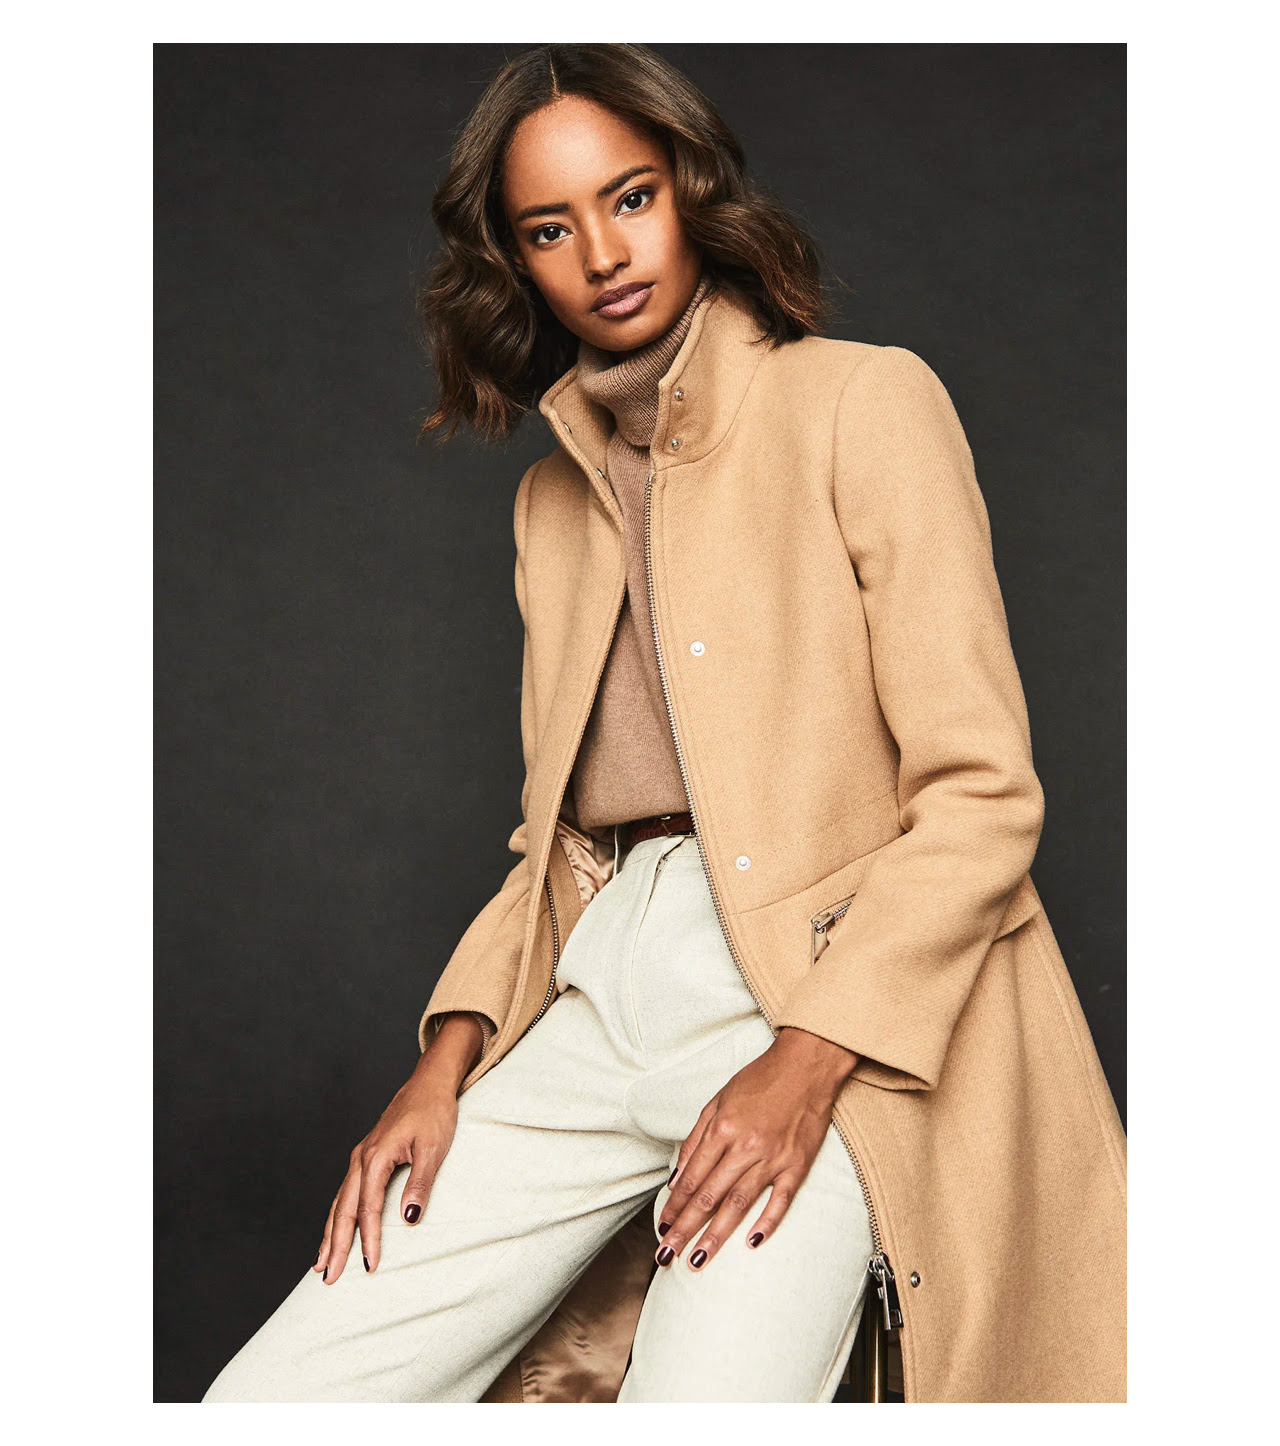 REISS - Sale: Top Picks To Bag Now